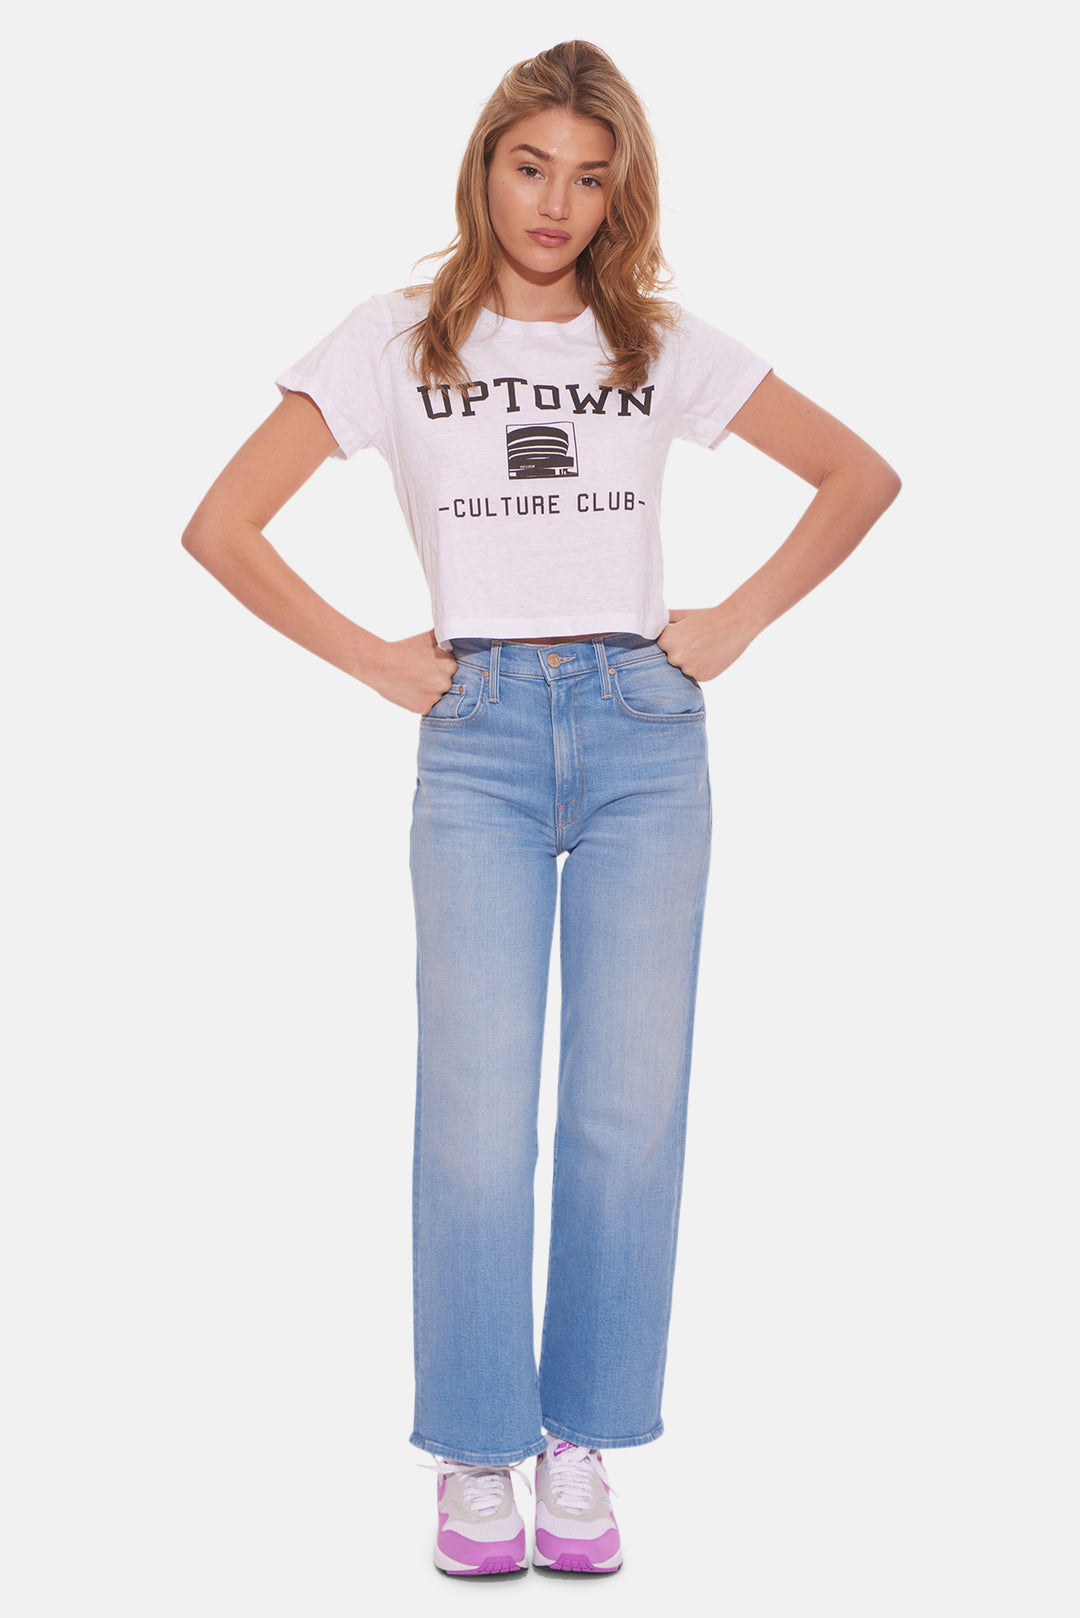 Uptown Culture Cropped Tee White